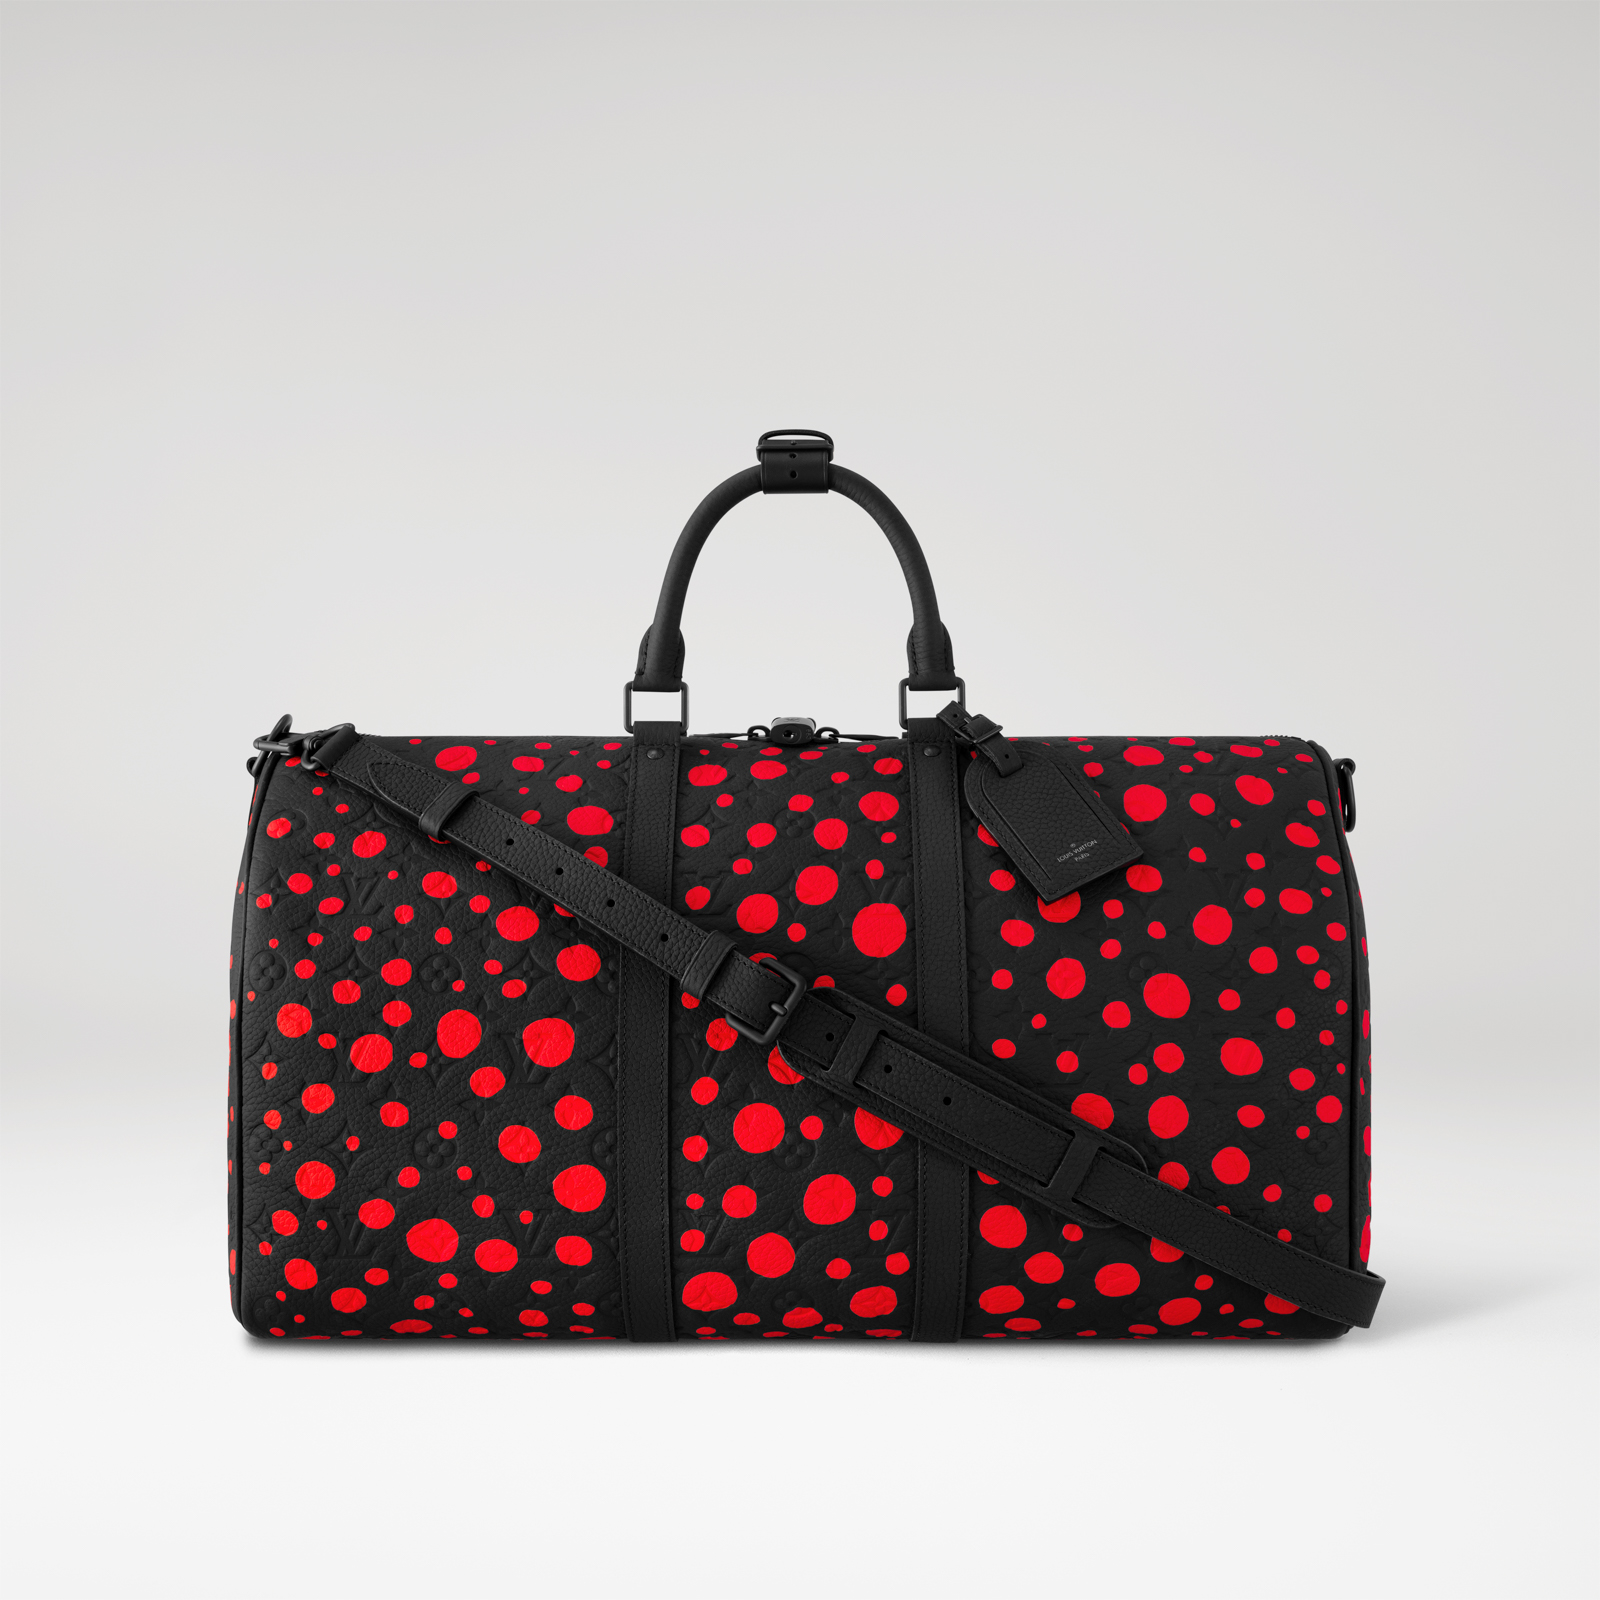 Louis Vuitton on X: Enchanted forms. Covered in #YayoiKusama's